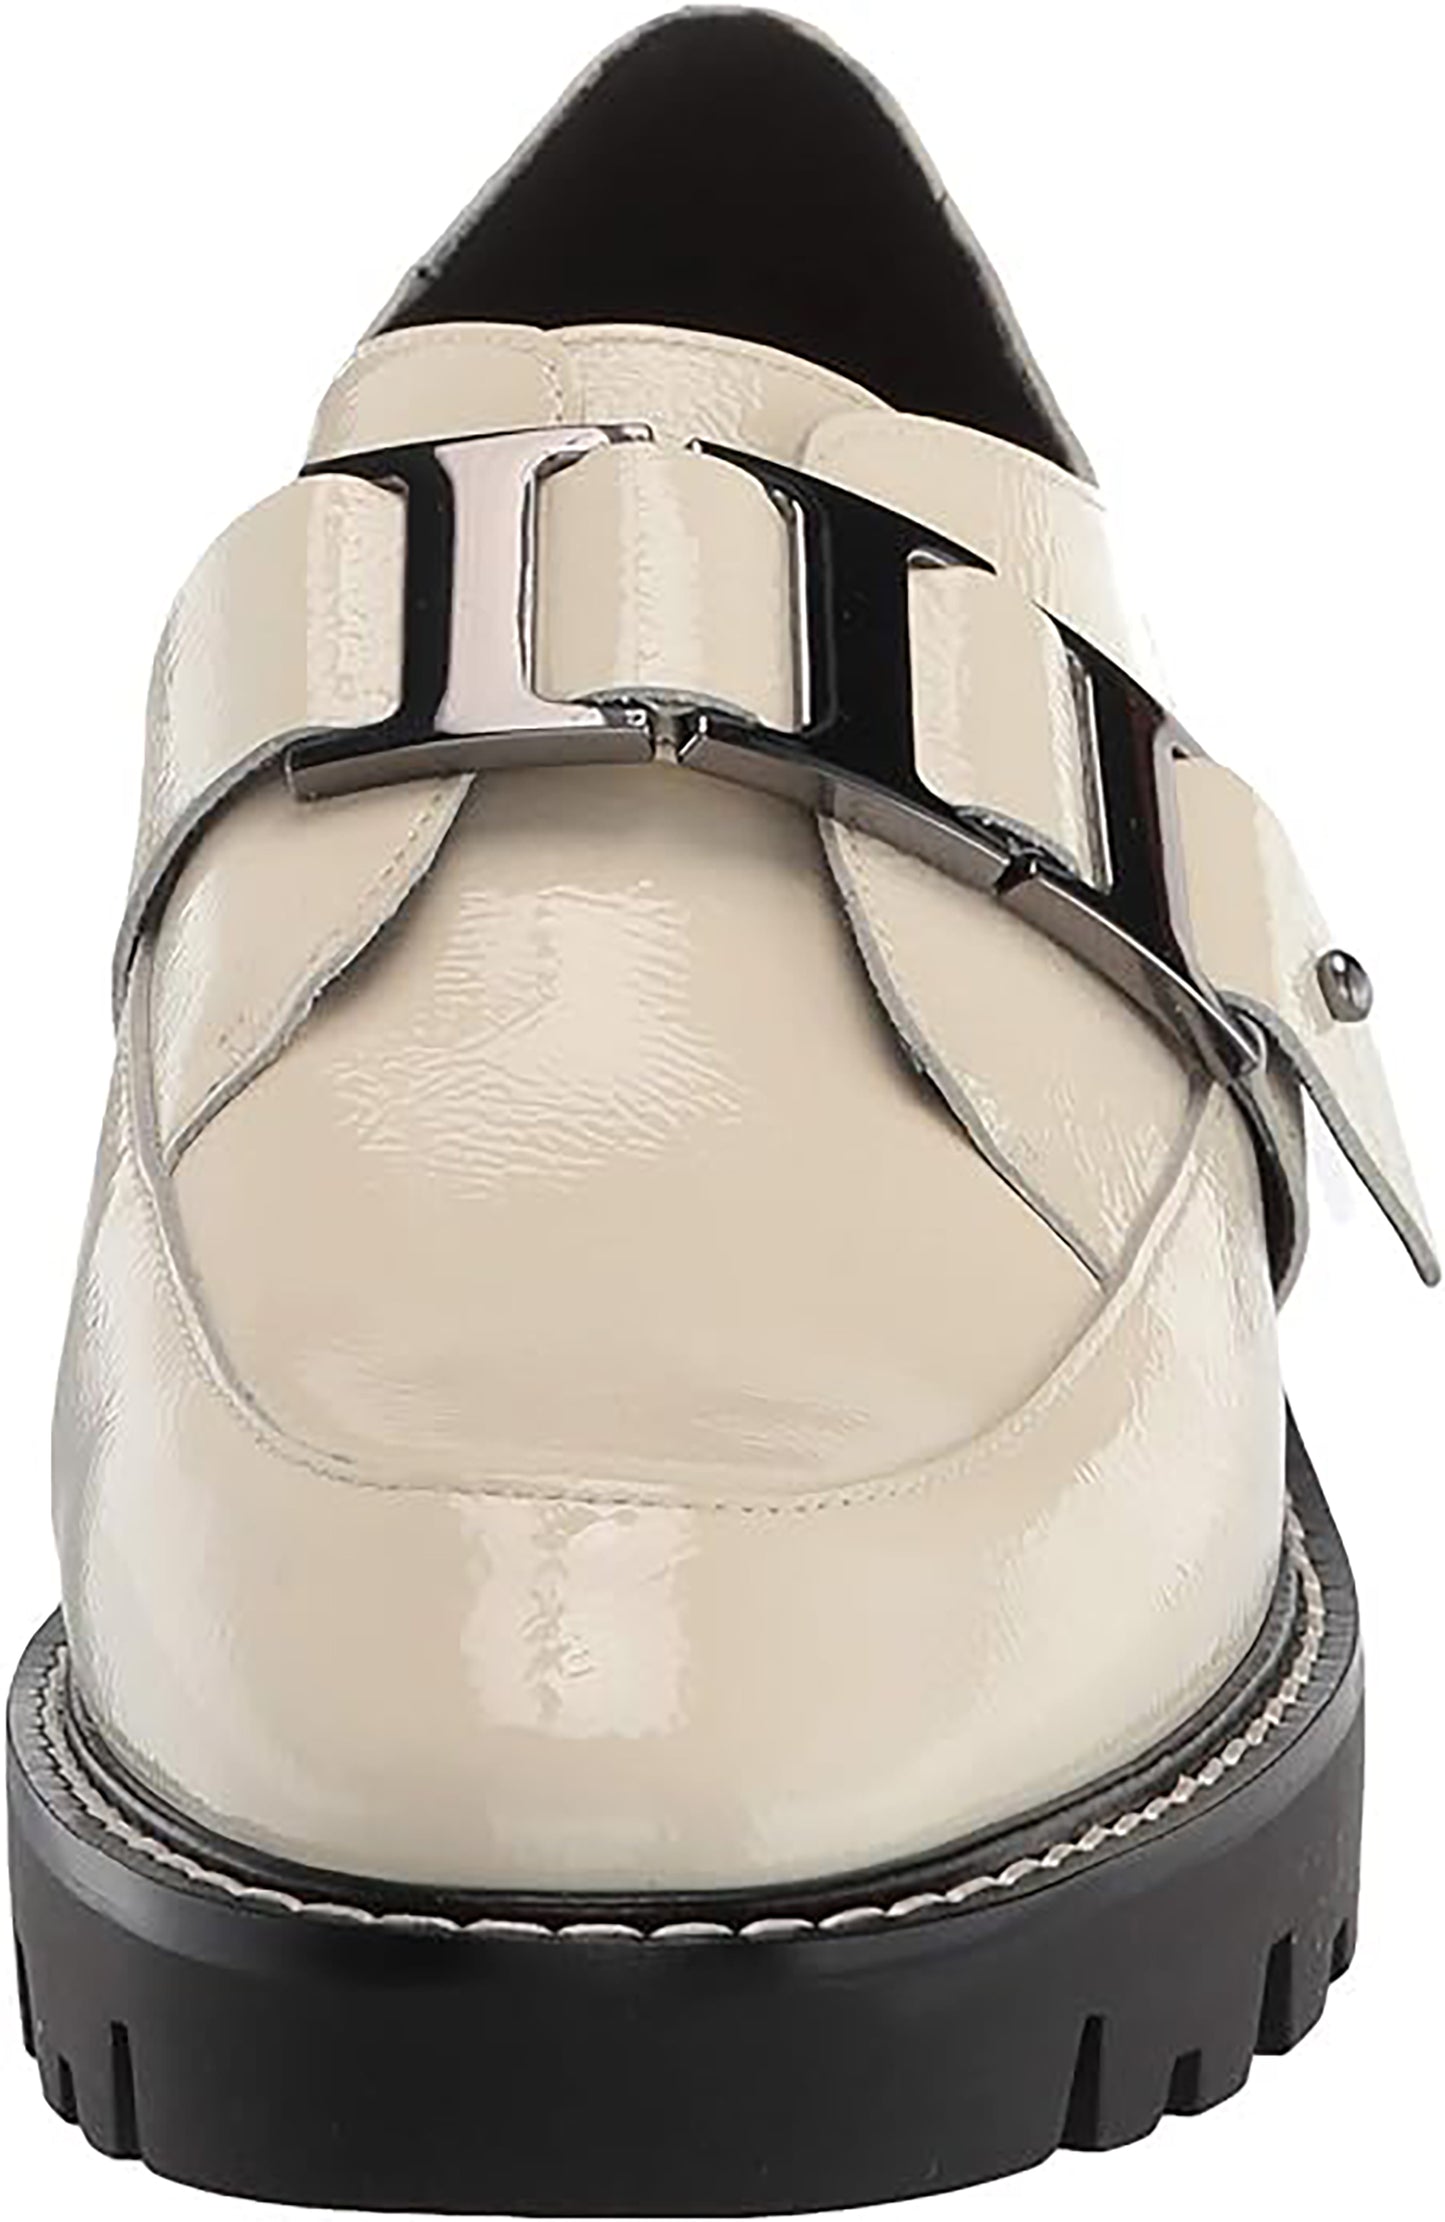 Donald J Pliner Eames Lug Sole Loafers Ivory Patent Leather Women Size US 10